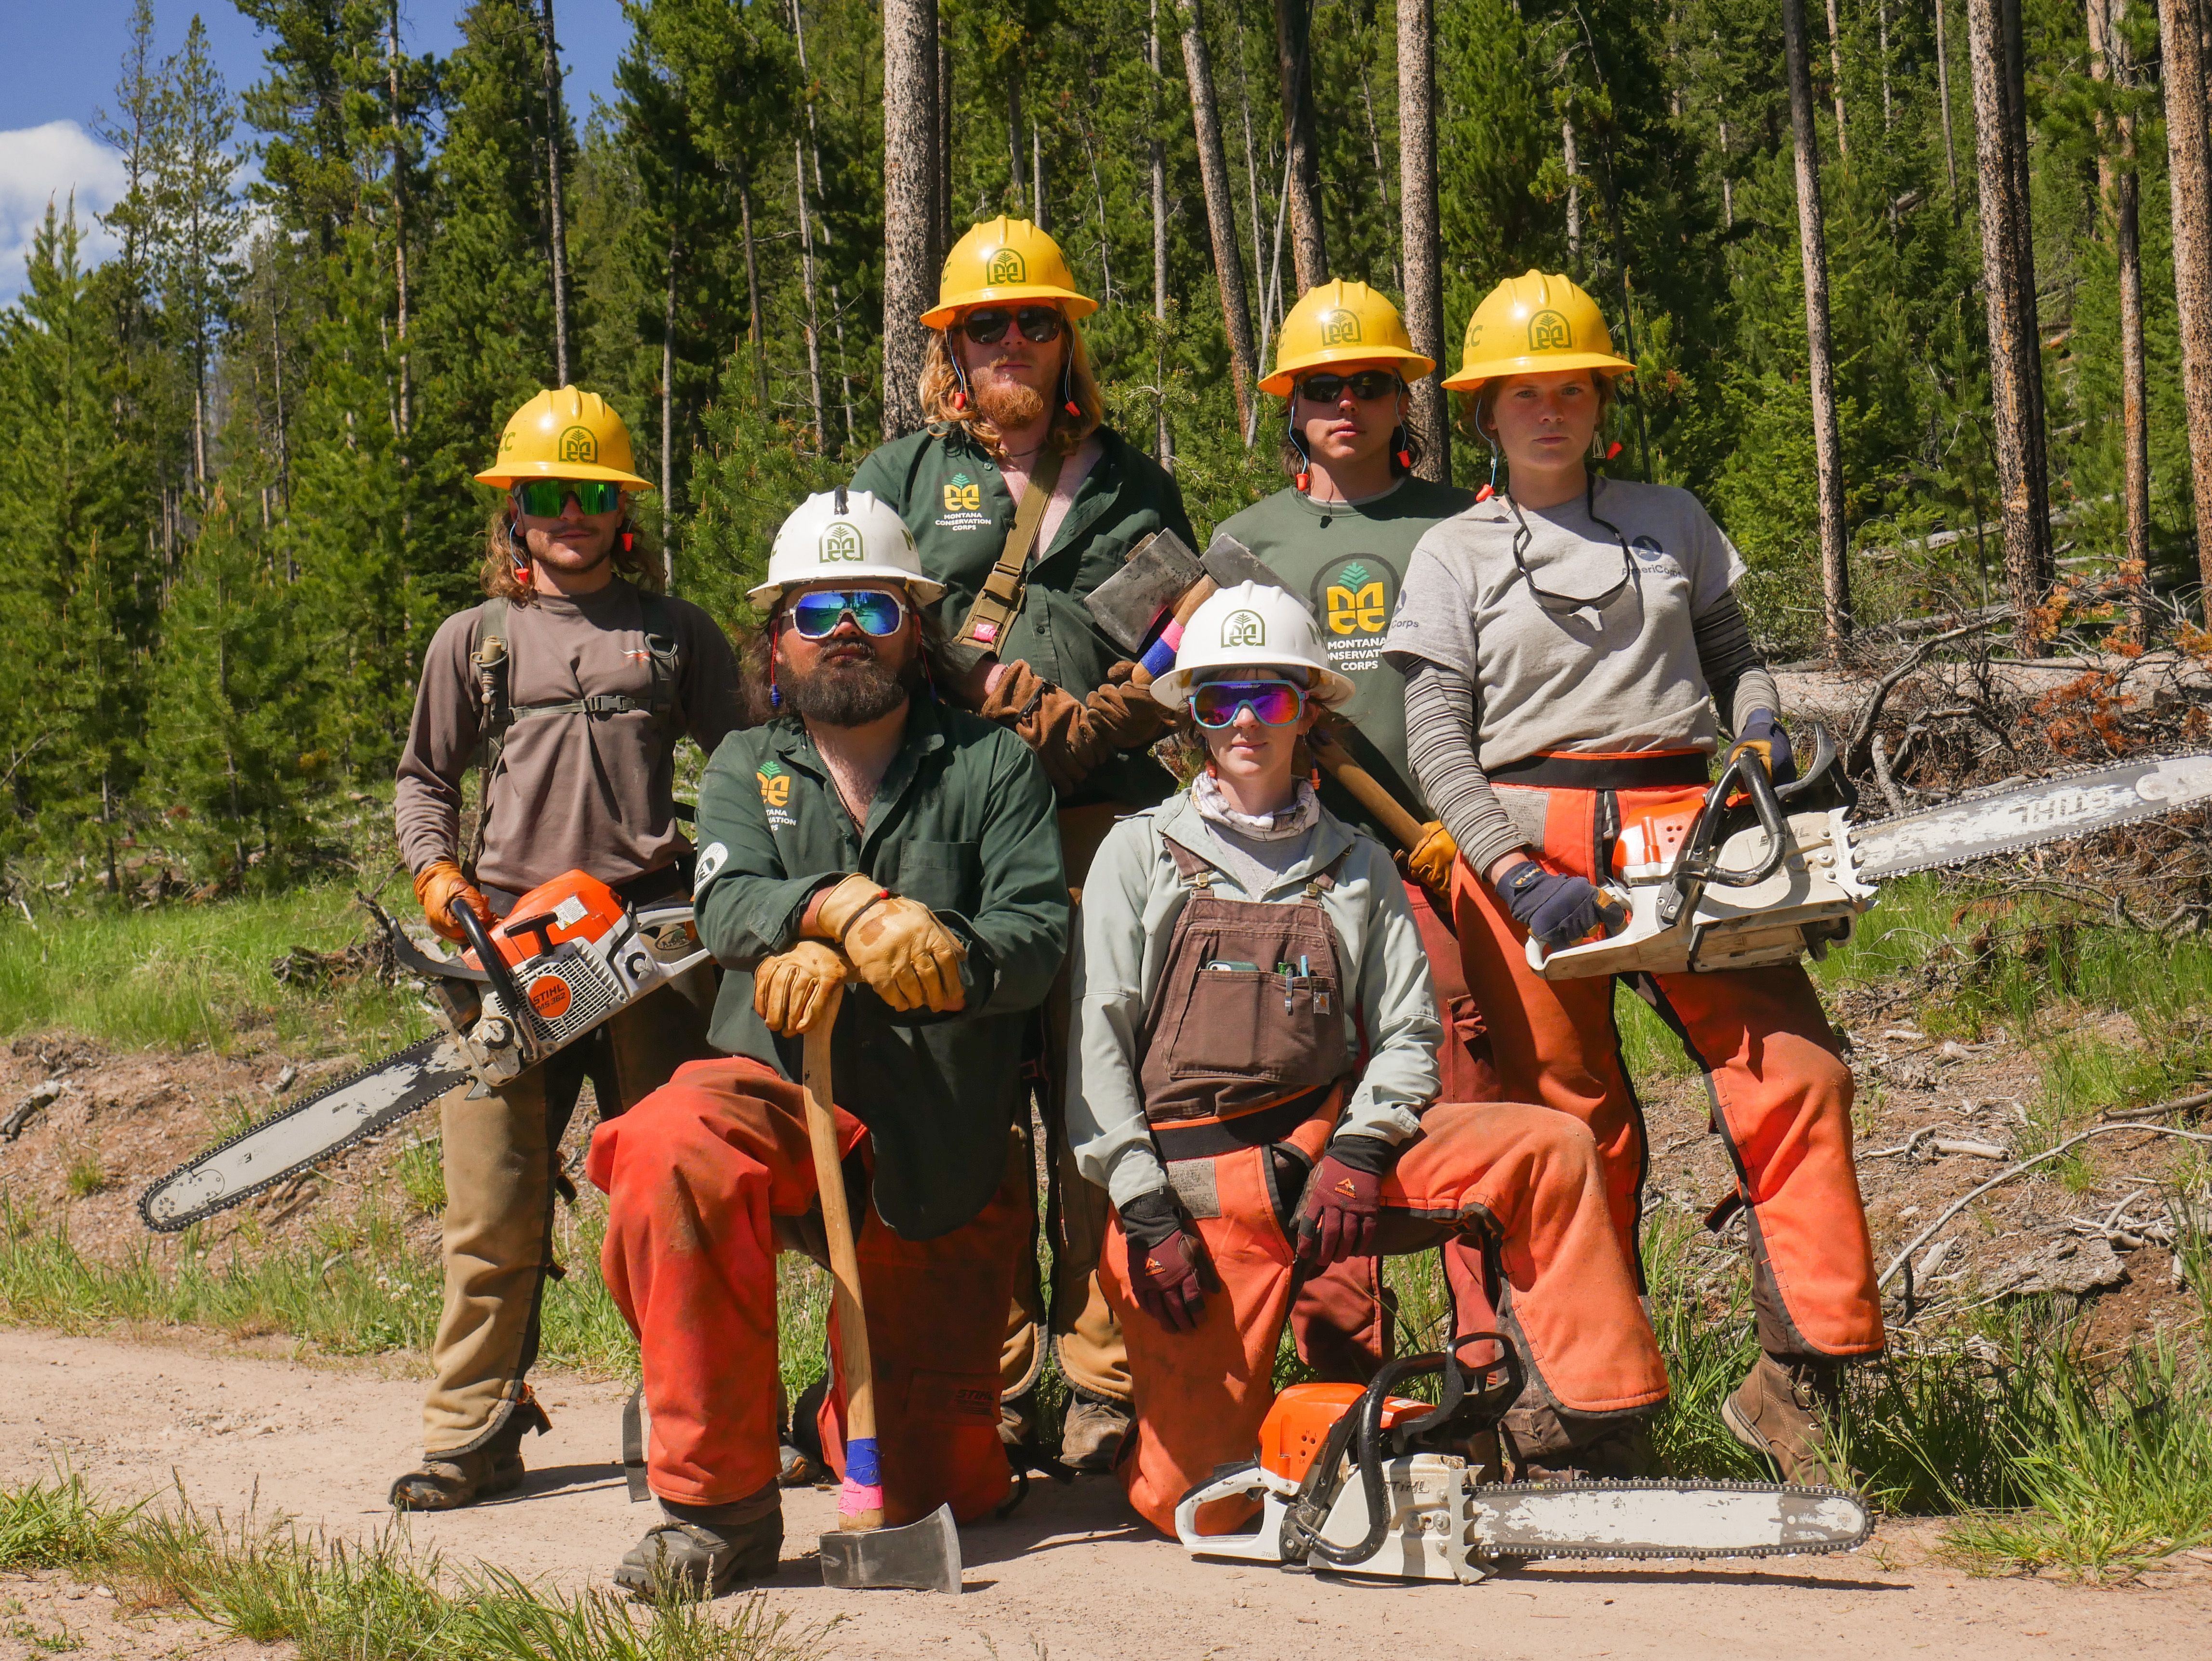 A crew poses with their chainsaws. They are all wearing helmets and chaps.